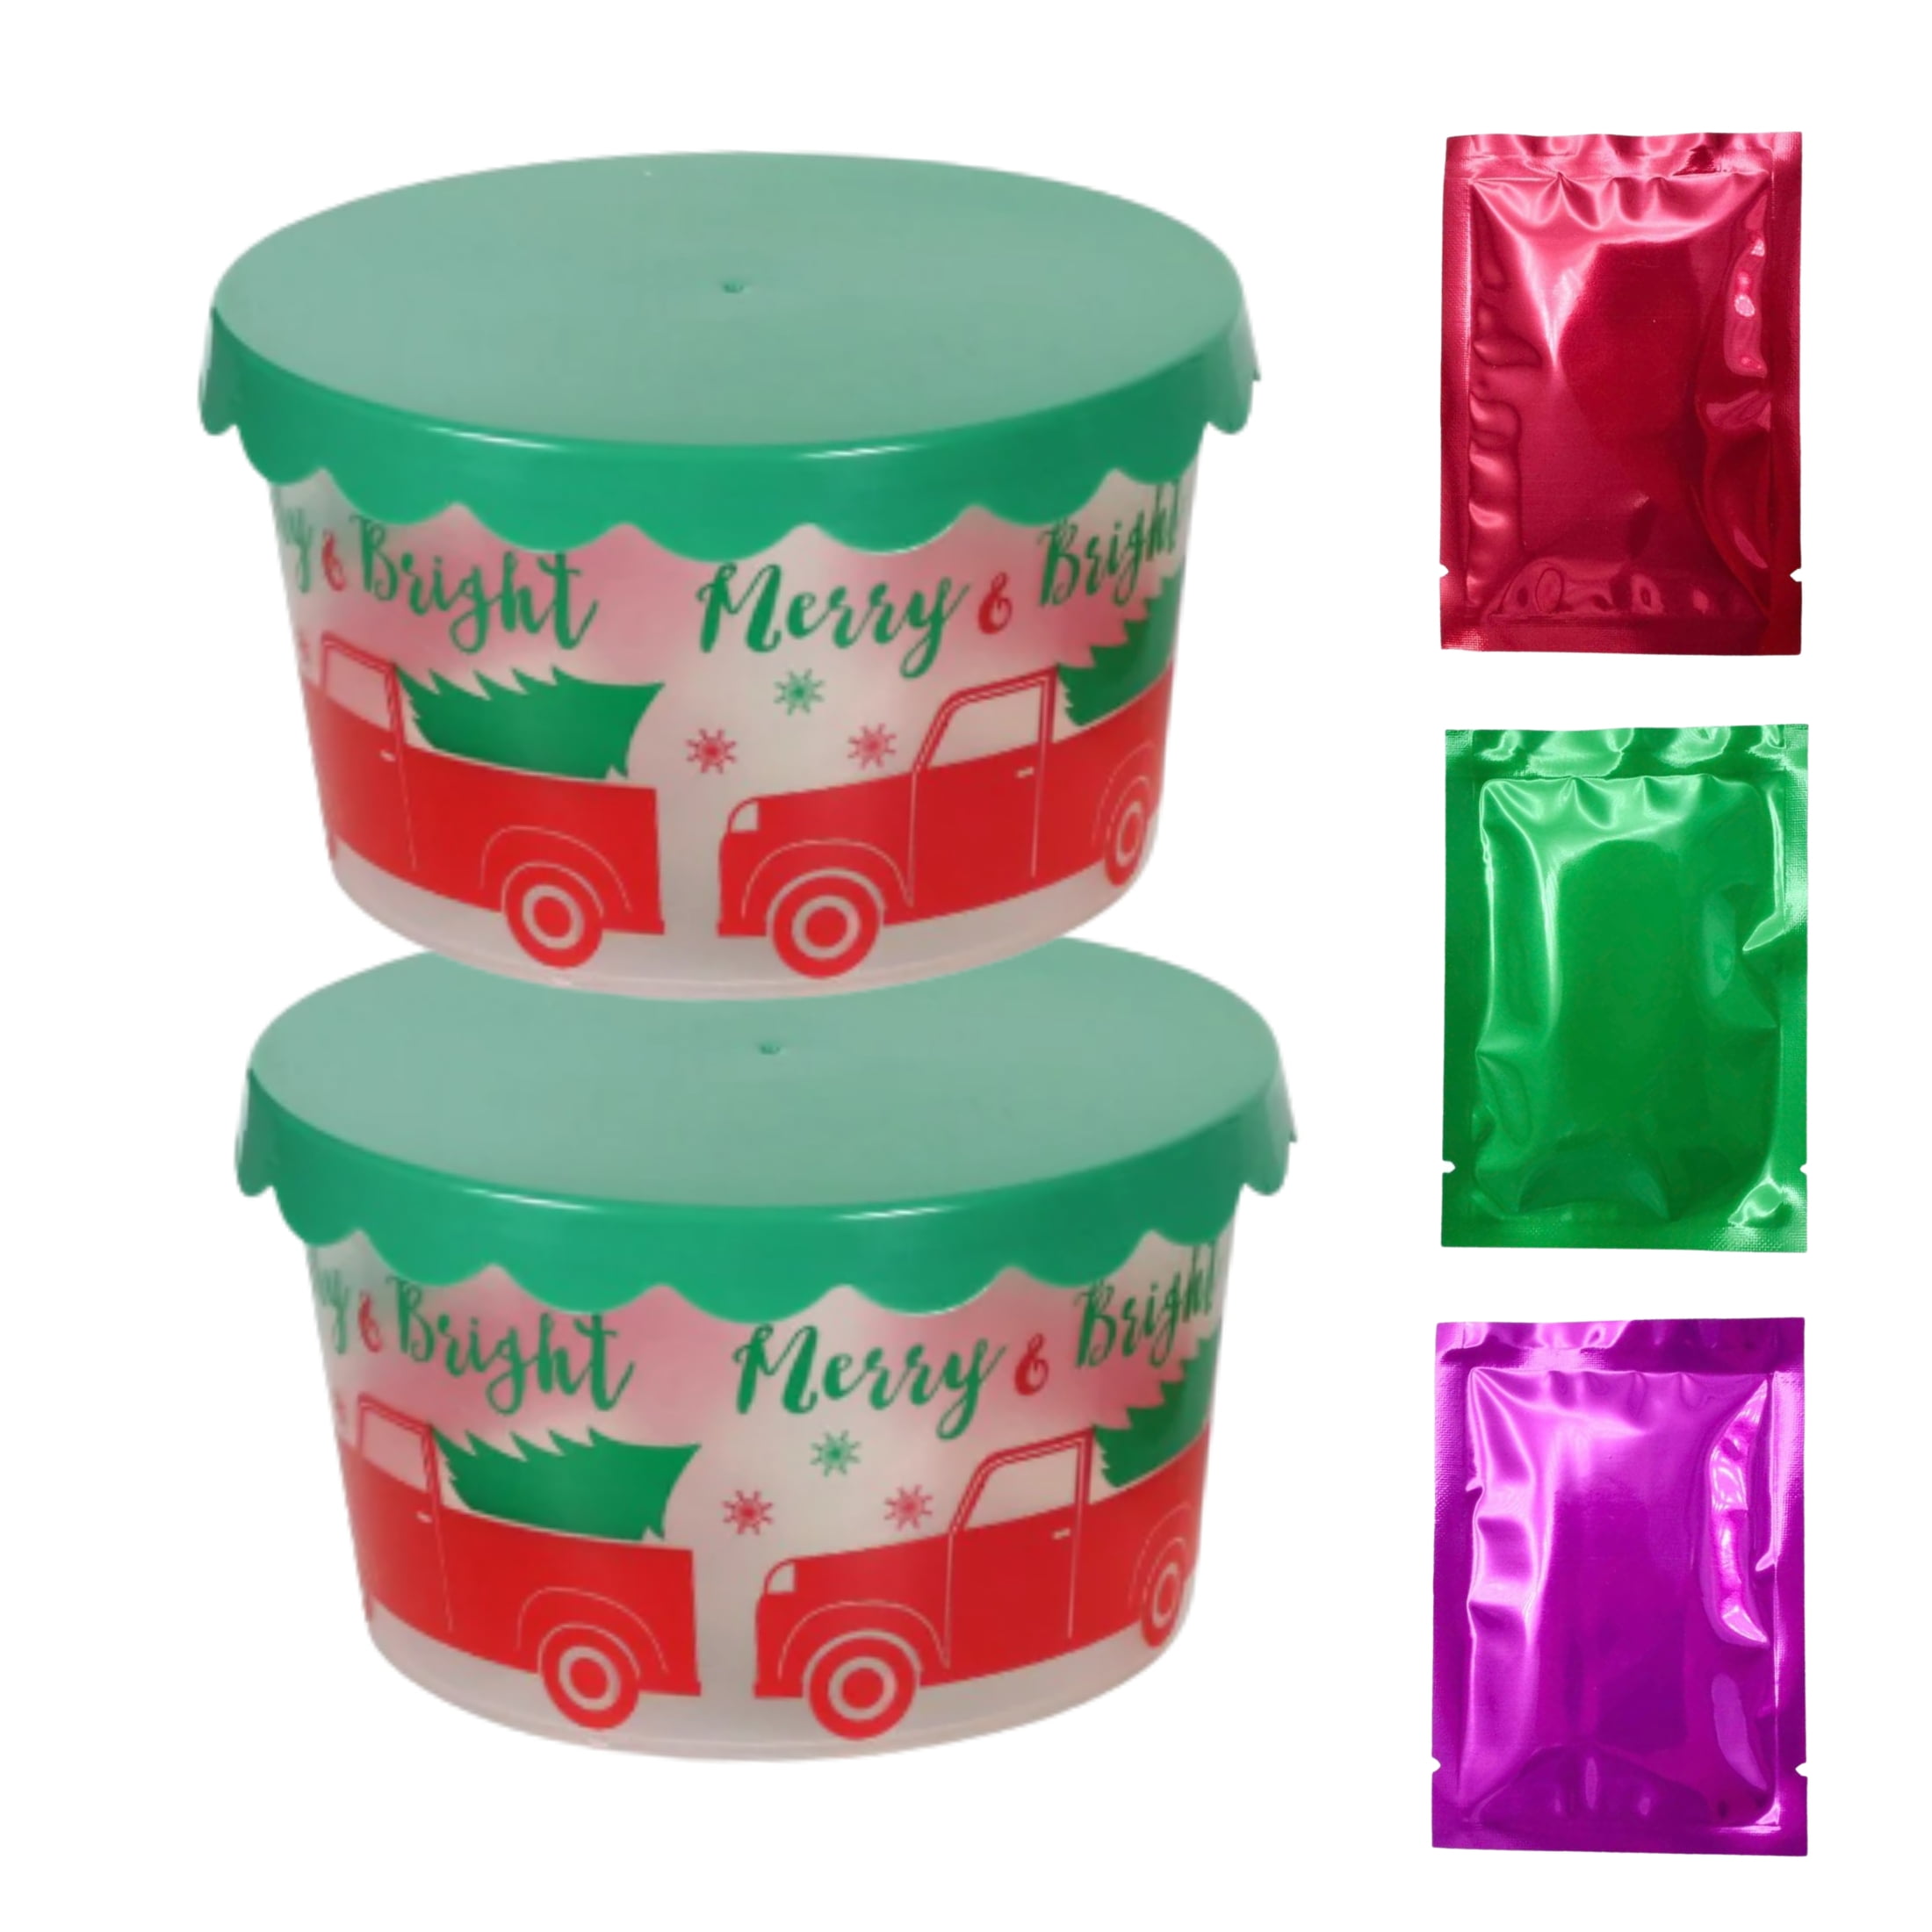 Round Christmas Containers Plastic Food Storage with Lids (2.75x4) Merry  and Bright Printed Tubs Cookies Candies Gift Canister Party Favor Home  Table Decor Pack of 2 w/ Bonus Snoep in Beperkte Oplage 